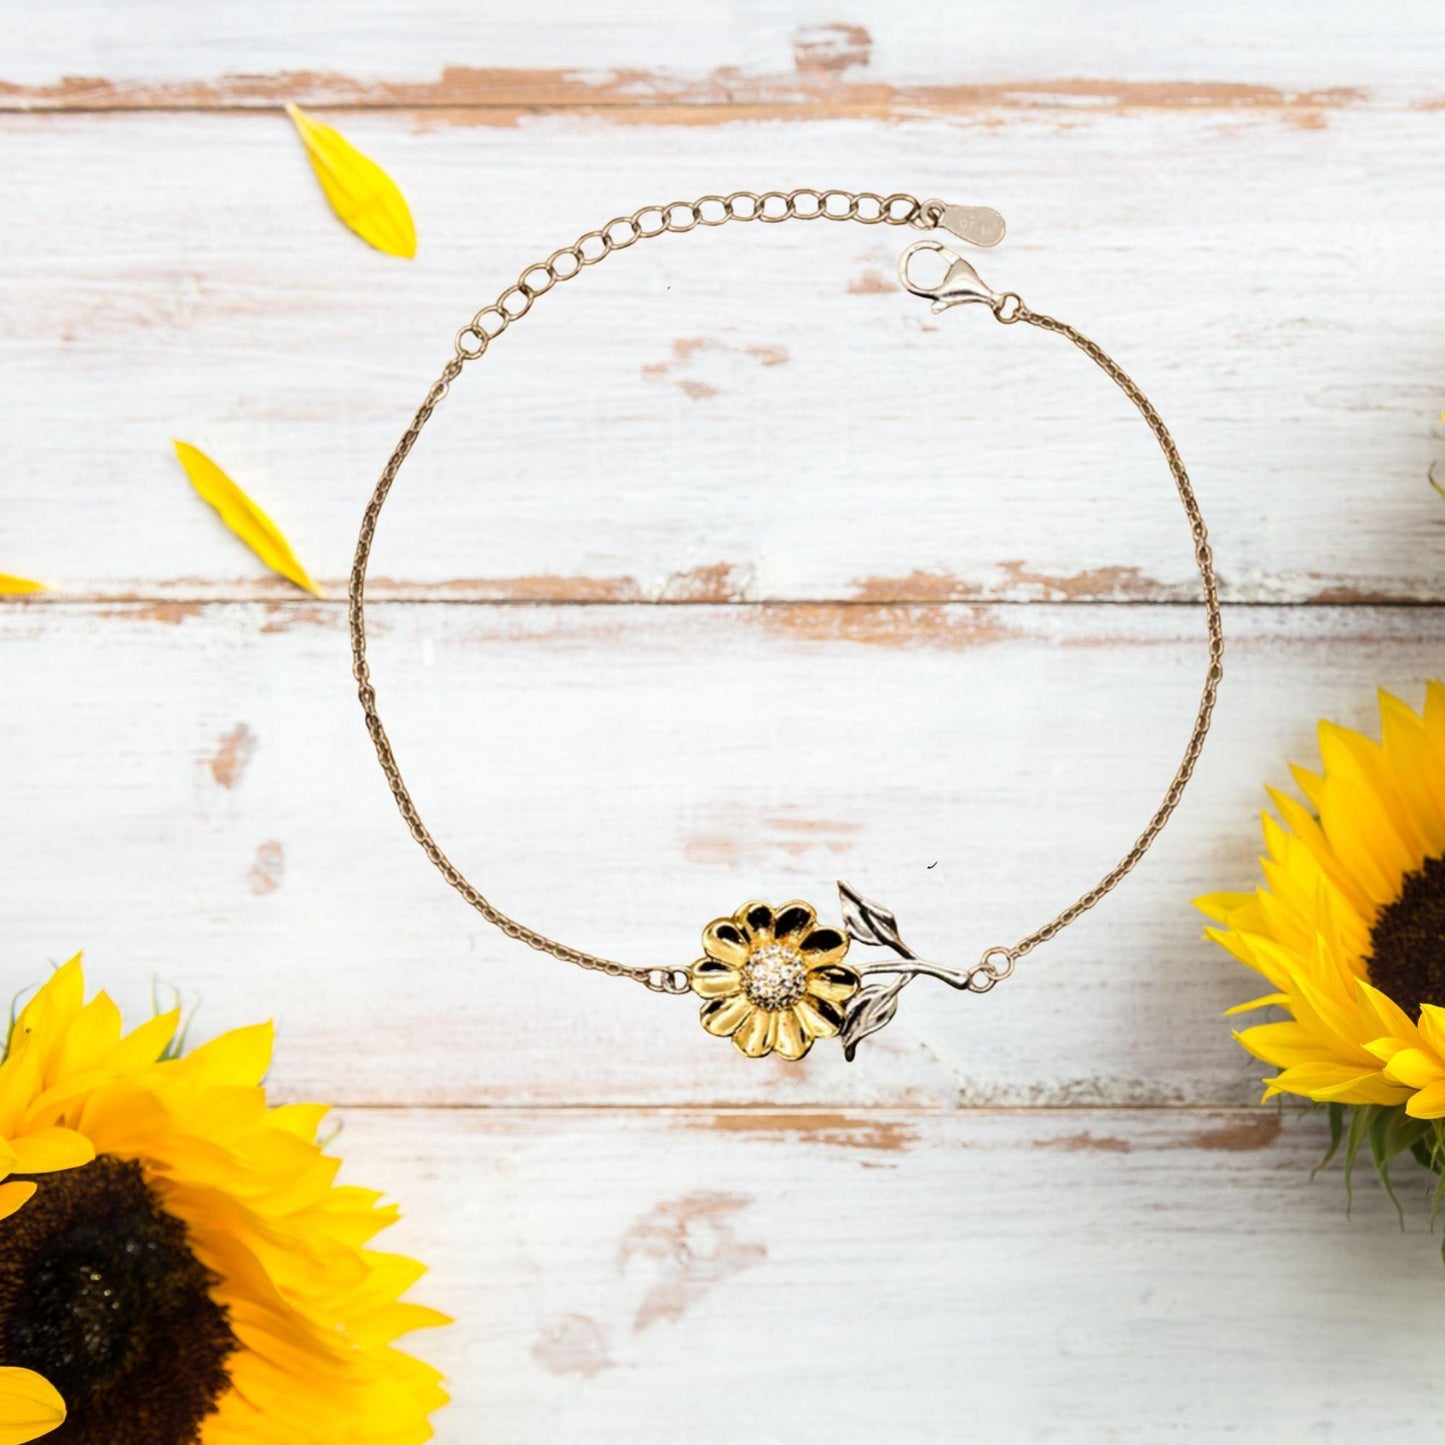 Court Clerk Sunflower Bracelet - Thanks for being who you are - Birthday Christmas Jewelry Gifts Coworkers Colleague Boss - Mallard Moon Gift Shop